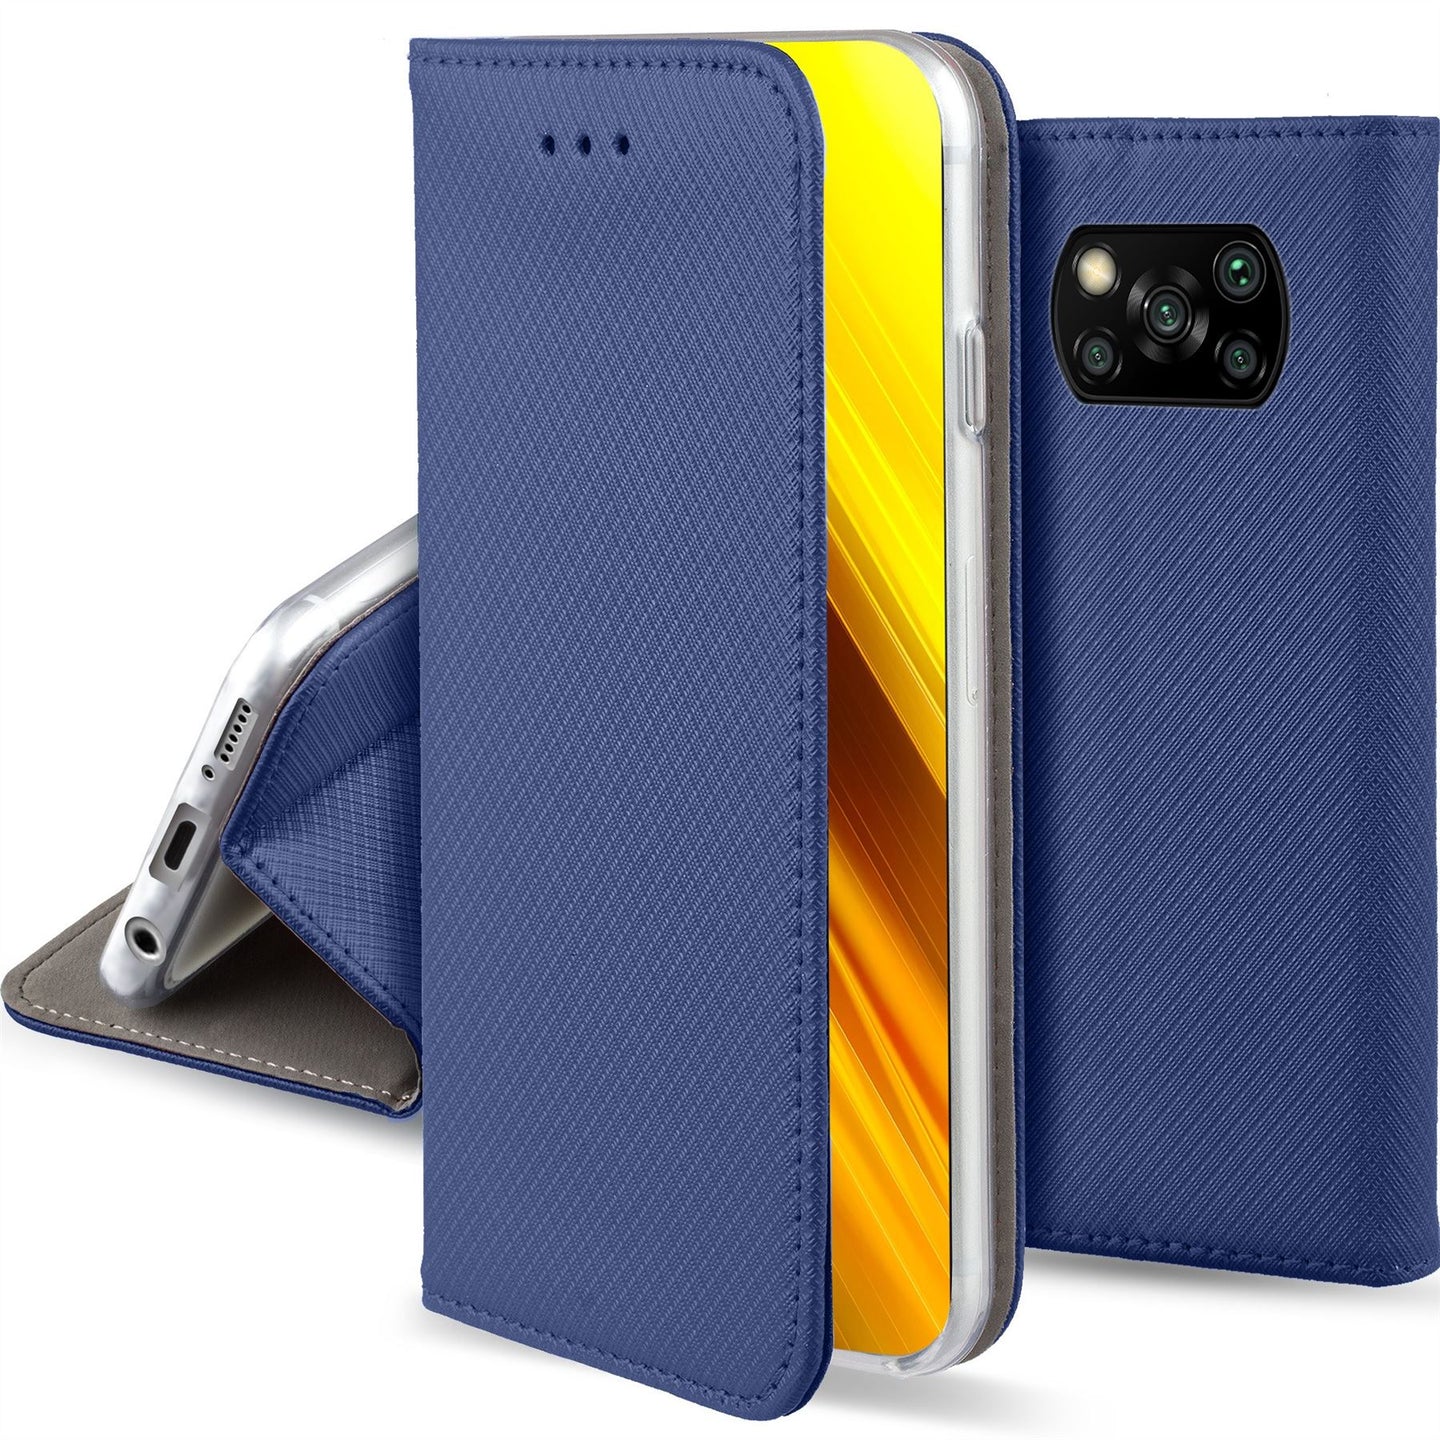 Moozy Case Flip Cover for Xiaomi Poco X3 NFC, Dark Blue - Smart Magnetic Flip Case with Card Holder and Stand